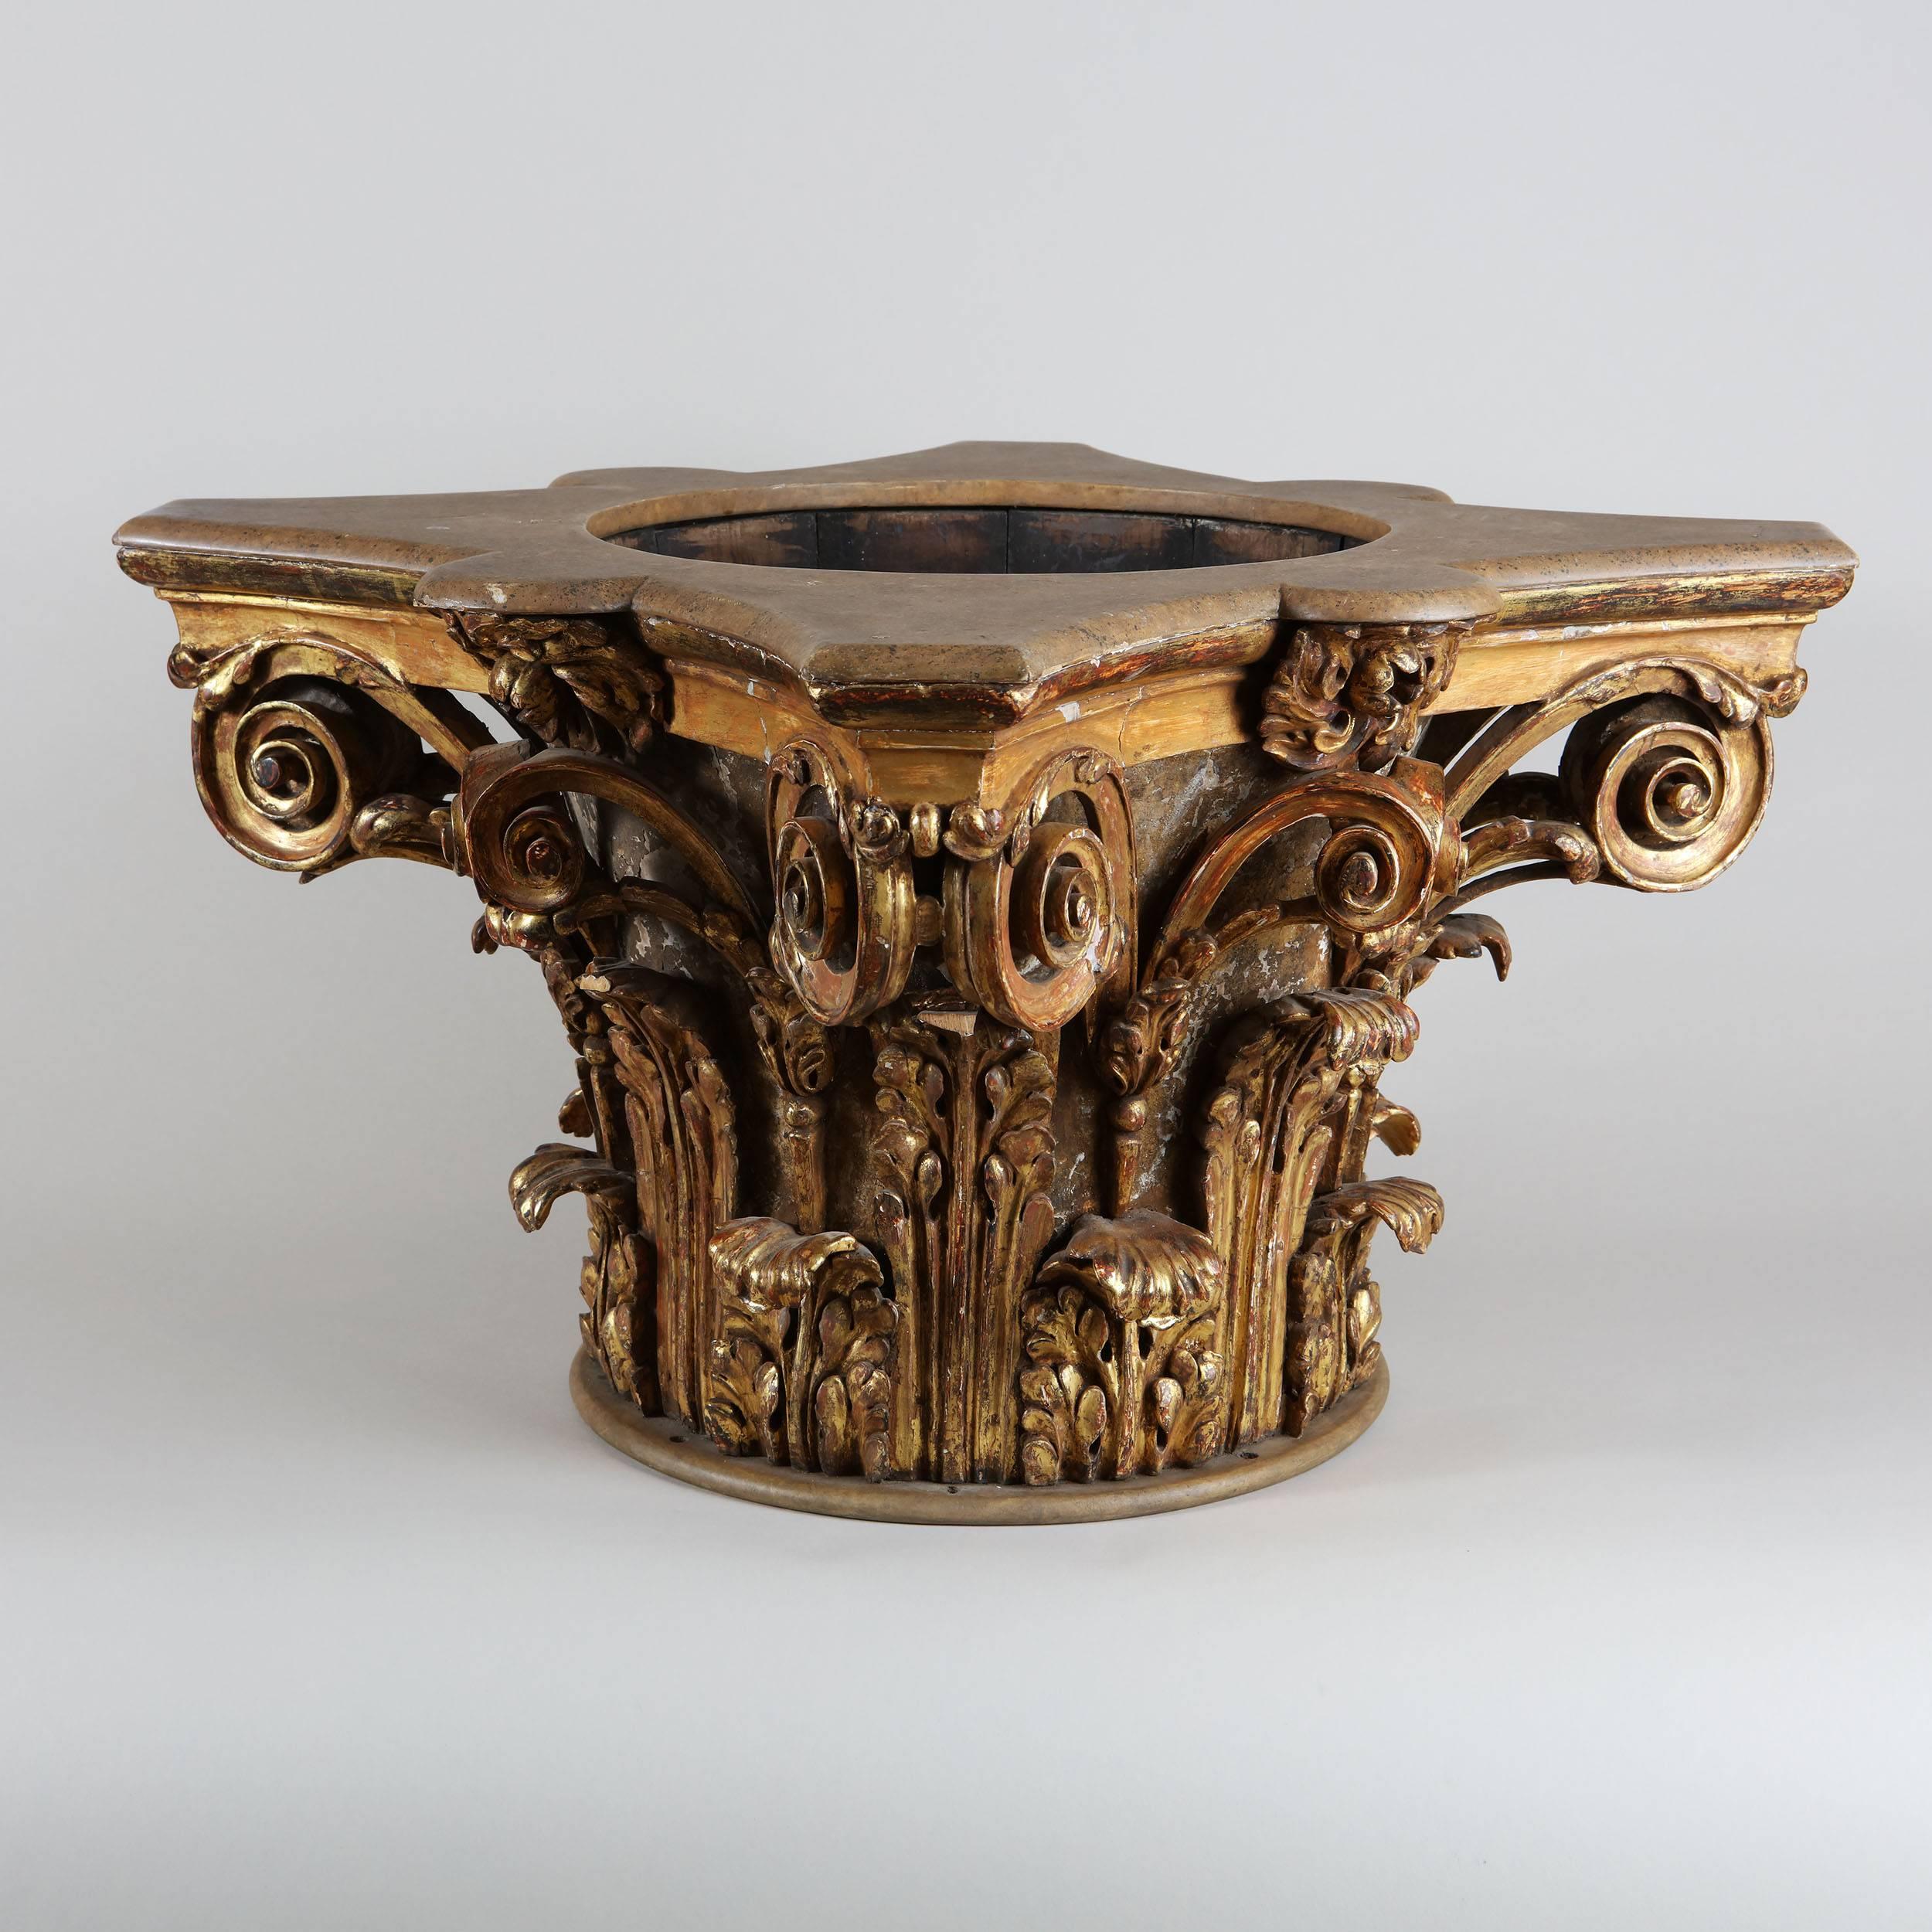 A very fine 19th century carved and giltwood Corinthian capital, richly carved with acanthus leaves and scrolling volutes, the top with a recess and central brass liner with ring handles.